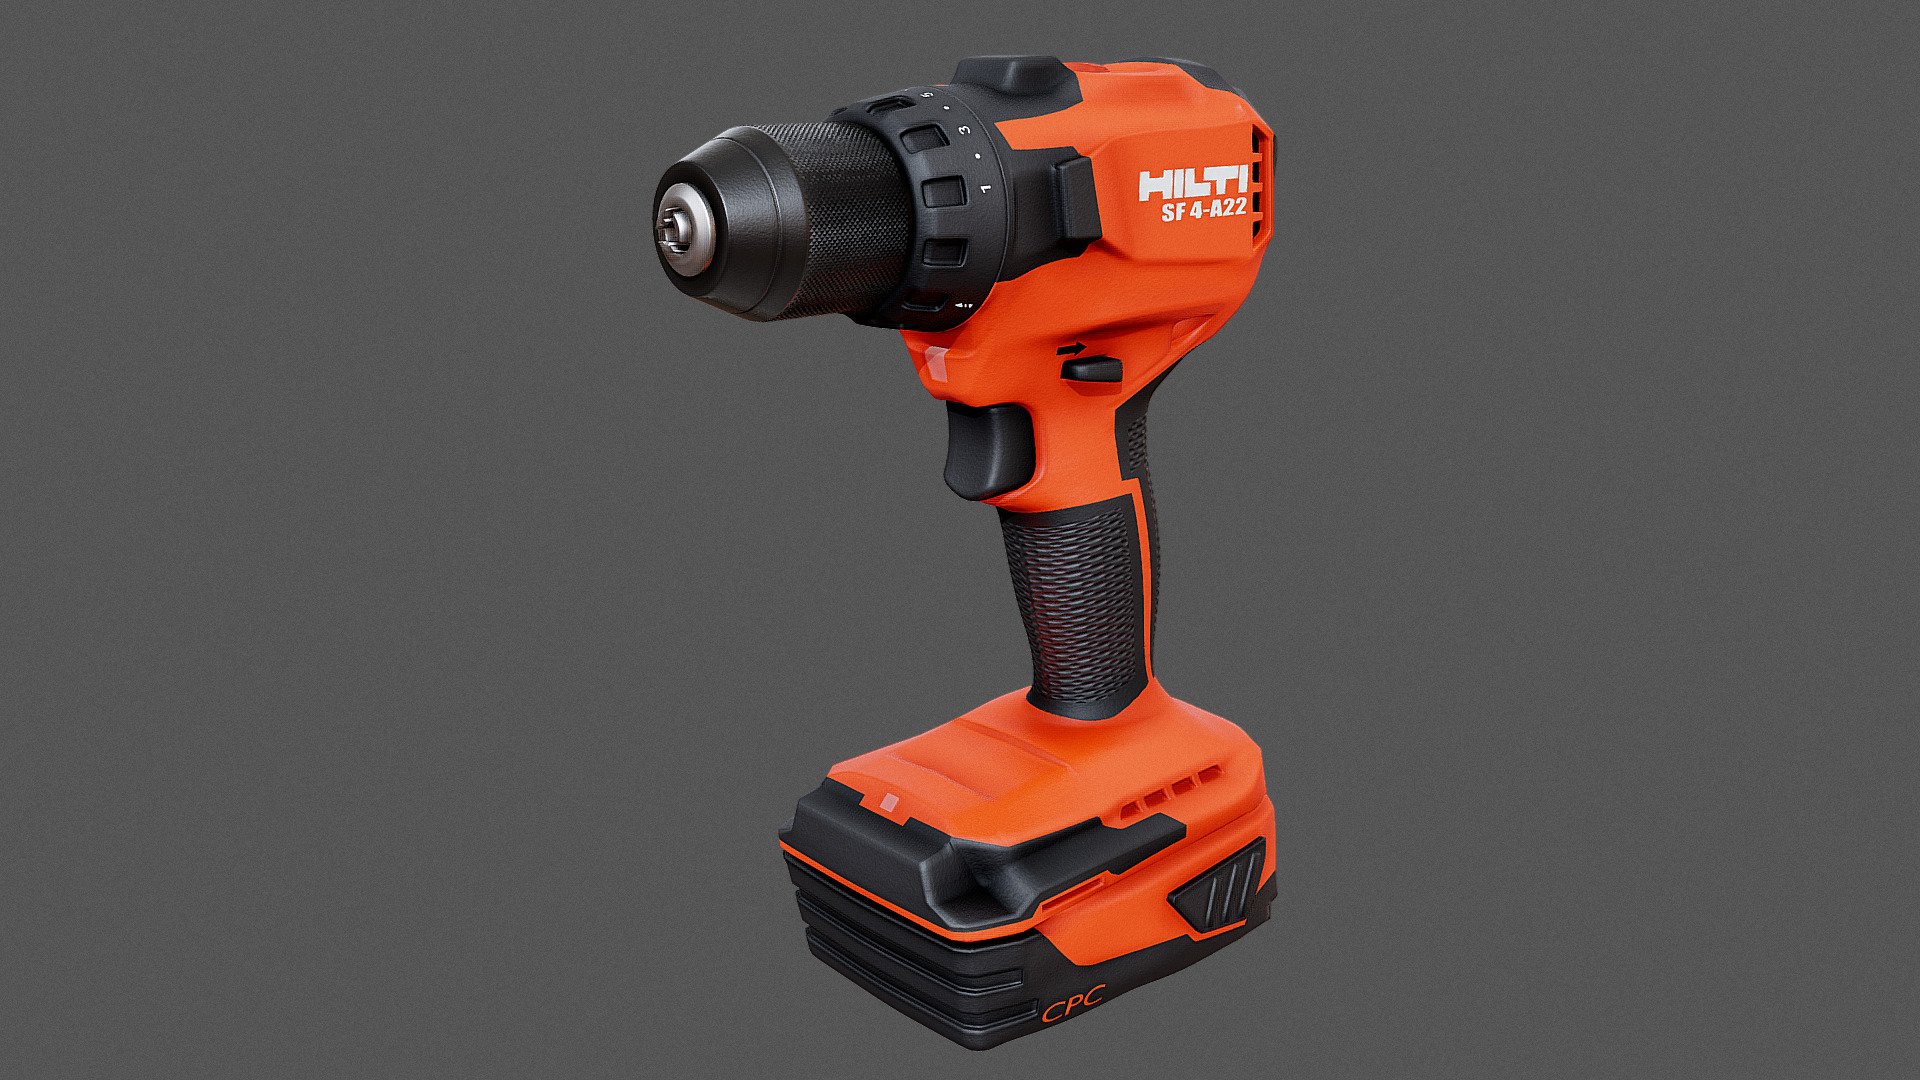 A Hilti Cordless Drill Driver SF 4-A22
Tools used: Blender, affinity photo (texture editing) - Hilti Cordless Drill Driver SF 4-A22 - 3D model by Weekend 3d model